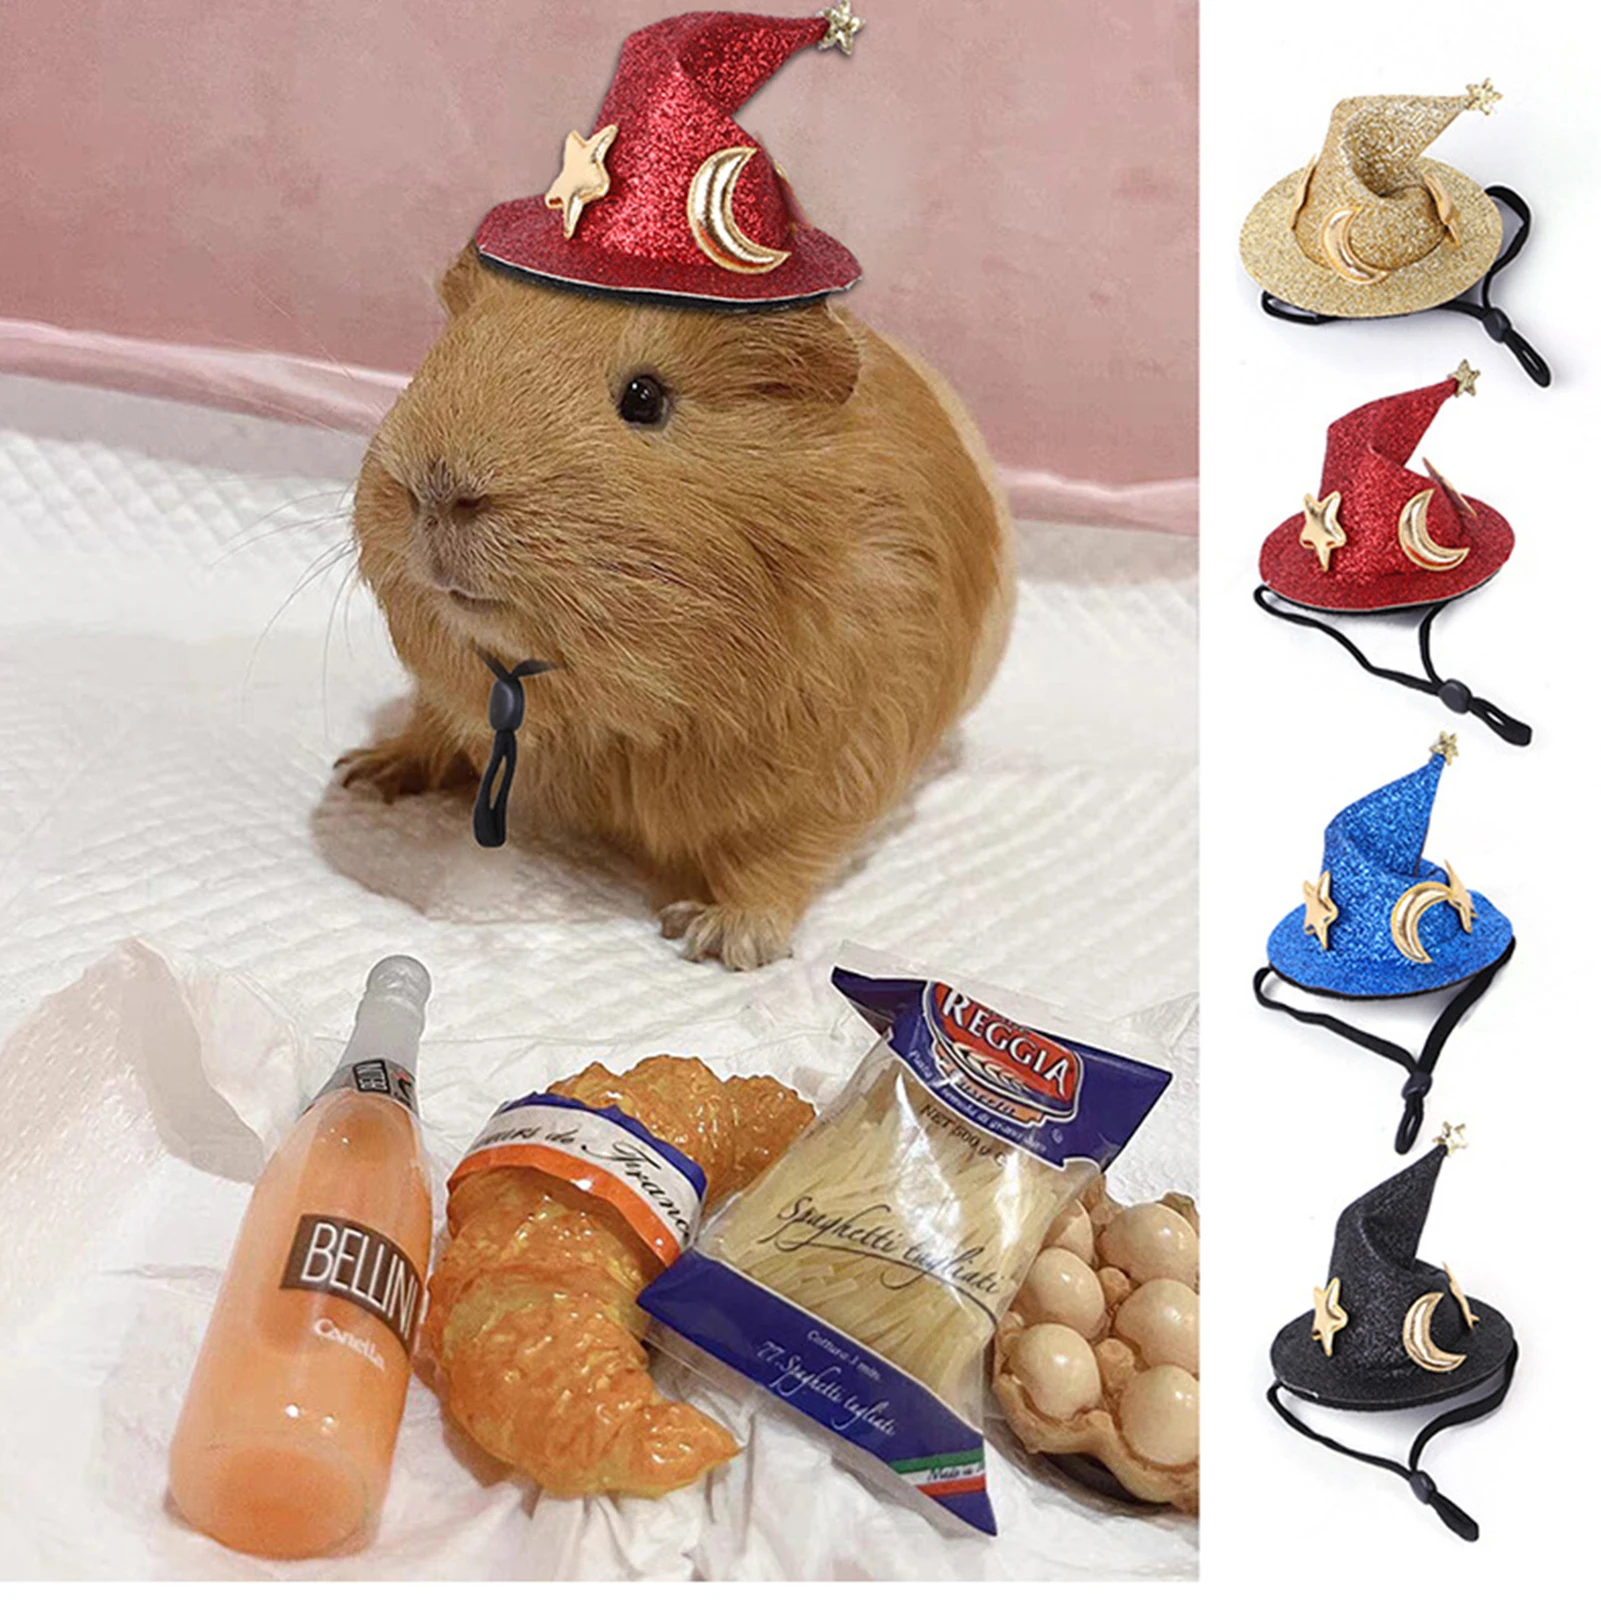 Hamster Hat Guinea Pig Pet Cute Small Animal Outfit Suit Cosplay For R ats Chinchilla Ferret Hedgehogs